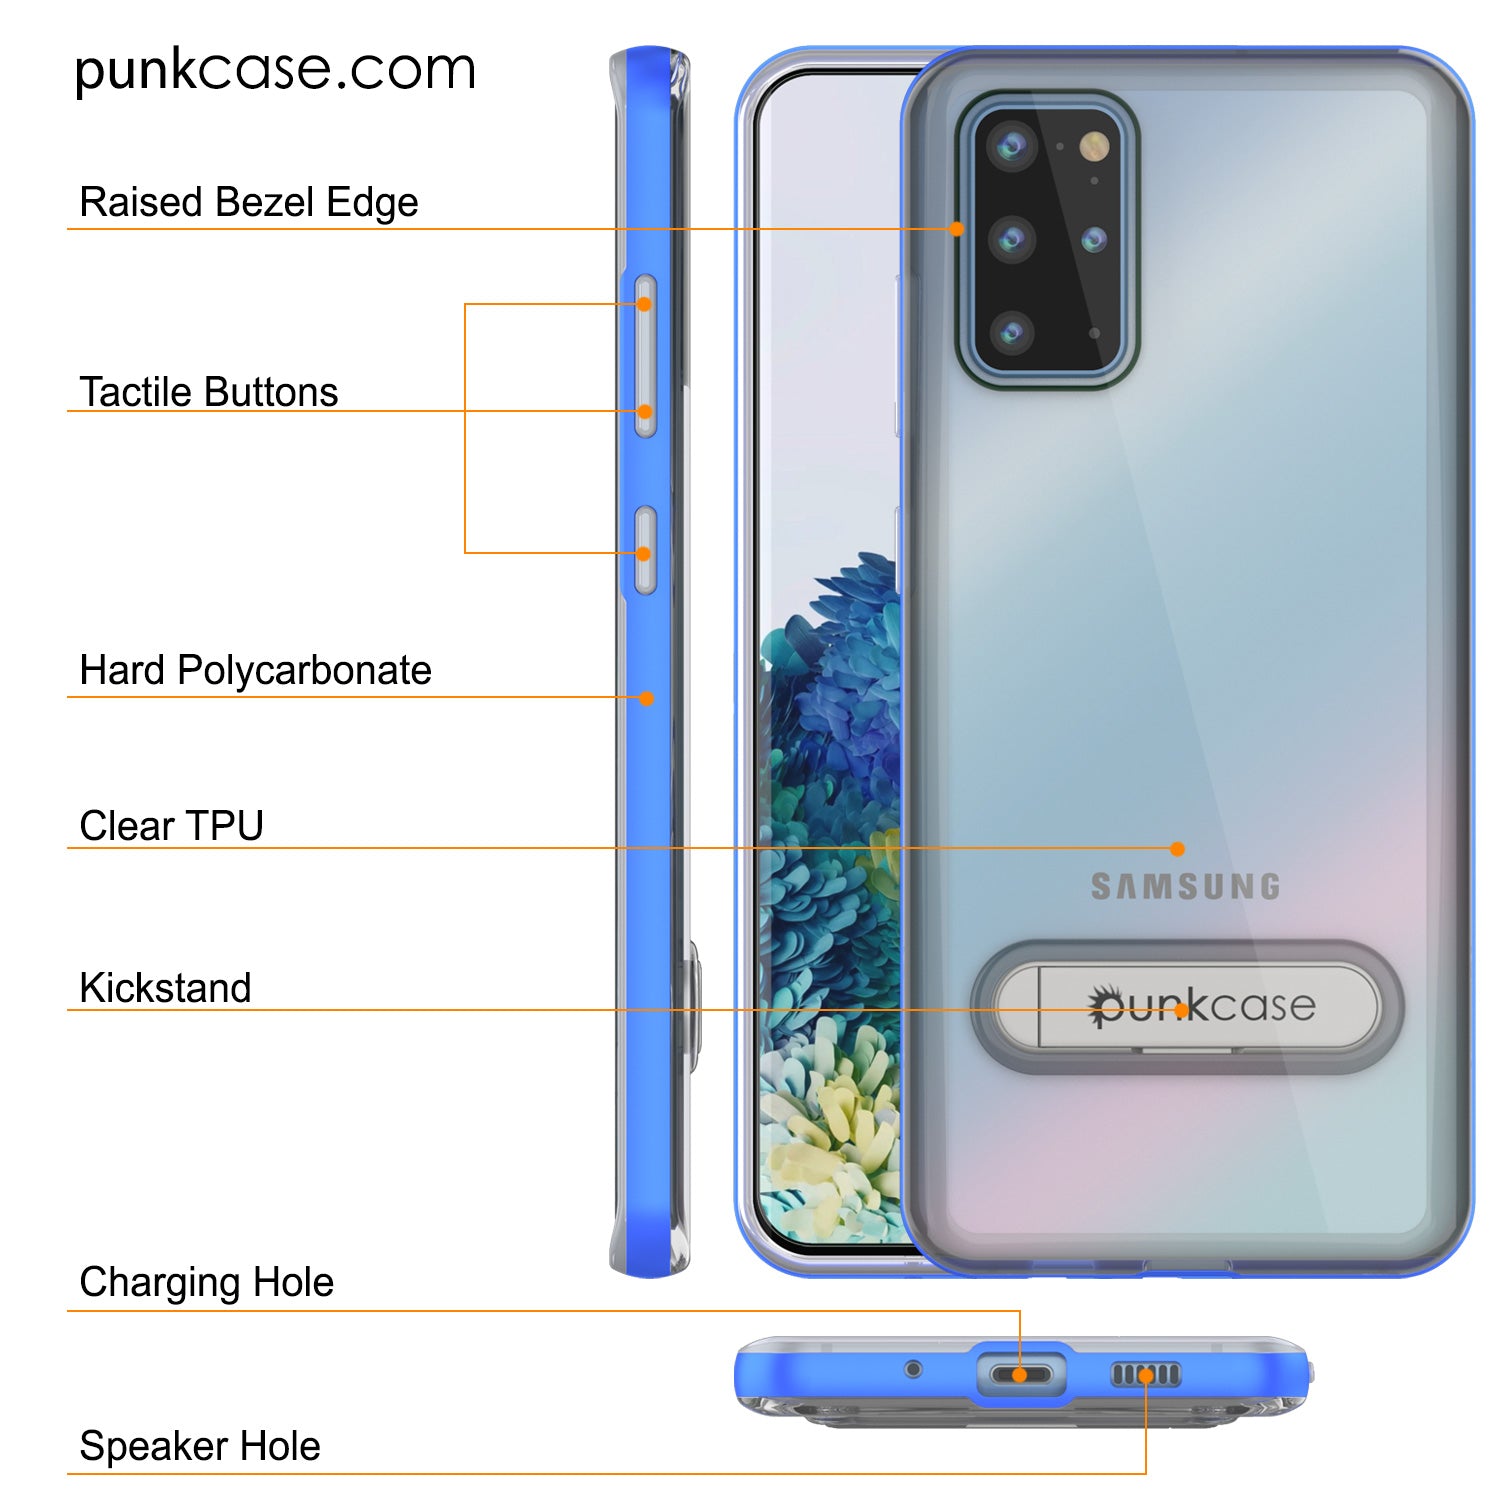 Galaxy S20+ Plus Case, PUNKcase [LUCID 3.0 Series] [Slim Fit] Armor Cover w/ Integrated Screen Protector [Blue]